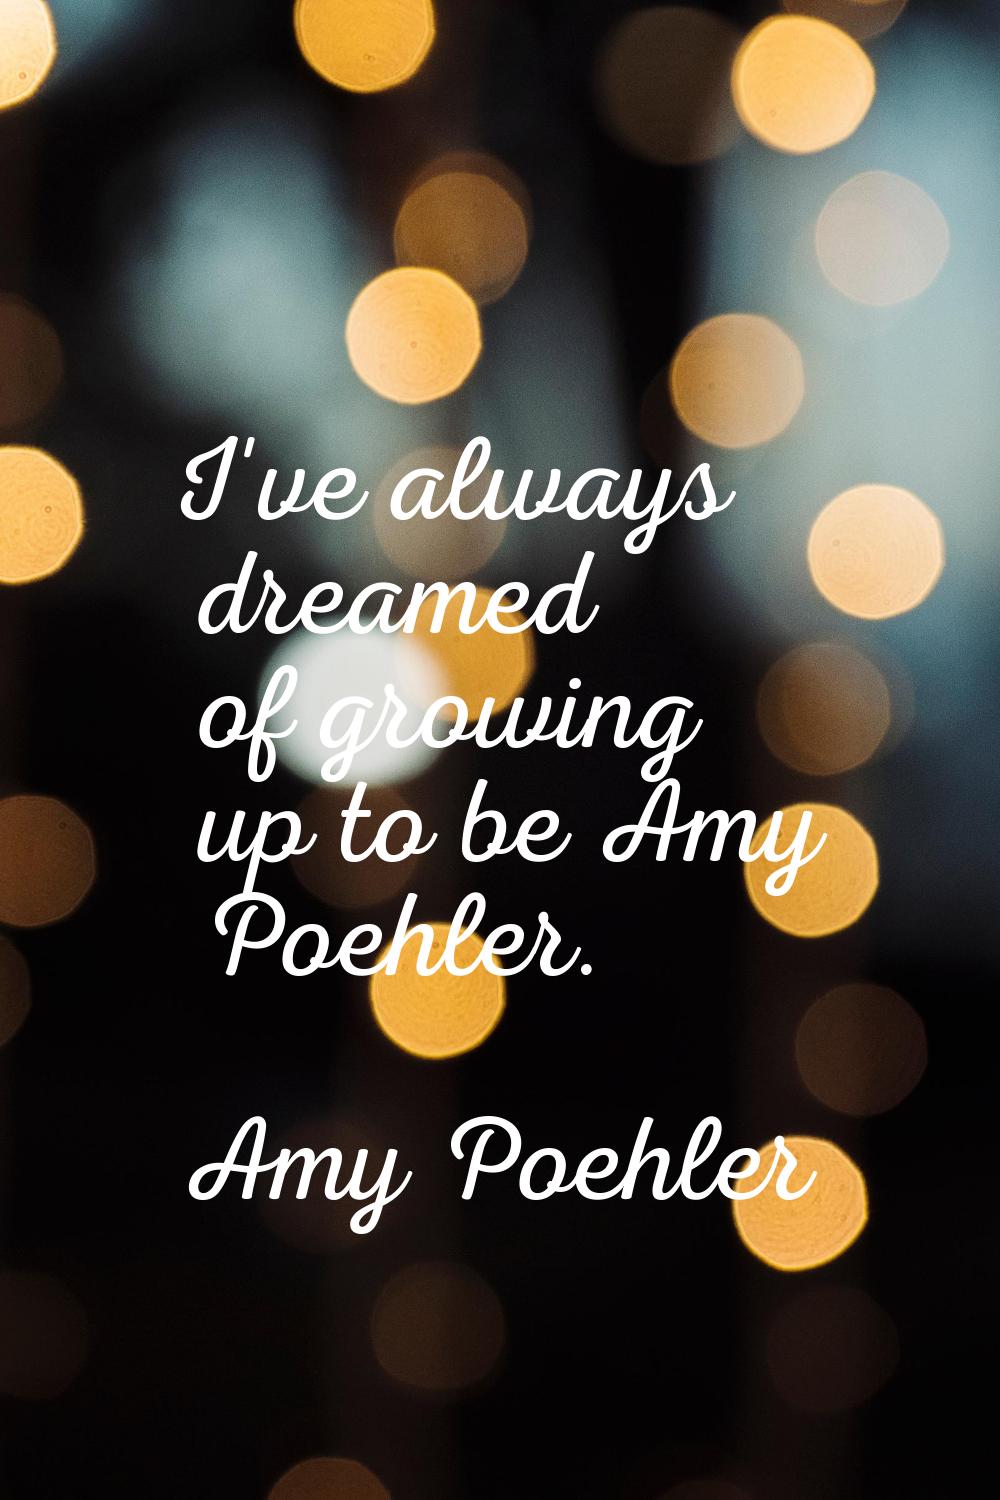 I've always dreamed of growing up to be Amy Poehler.